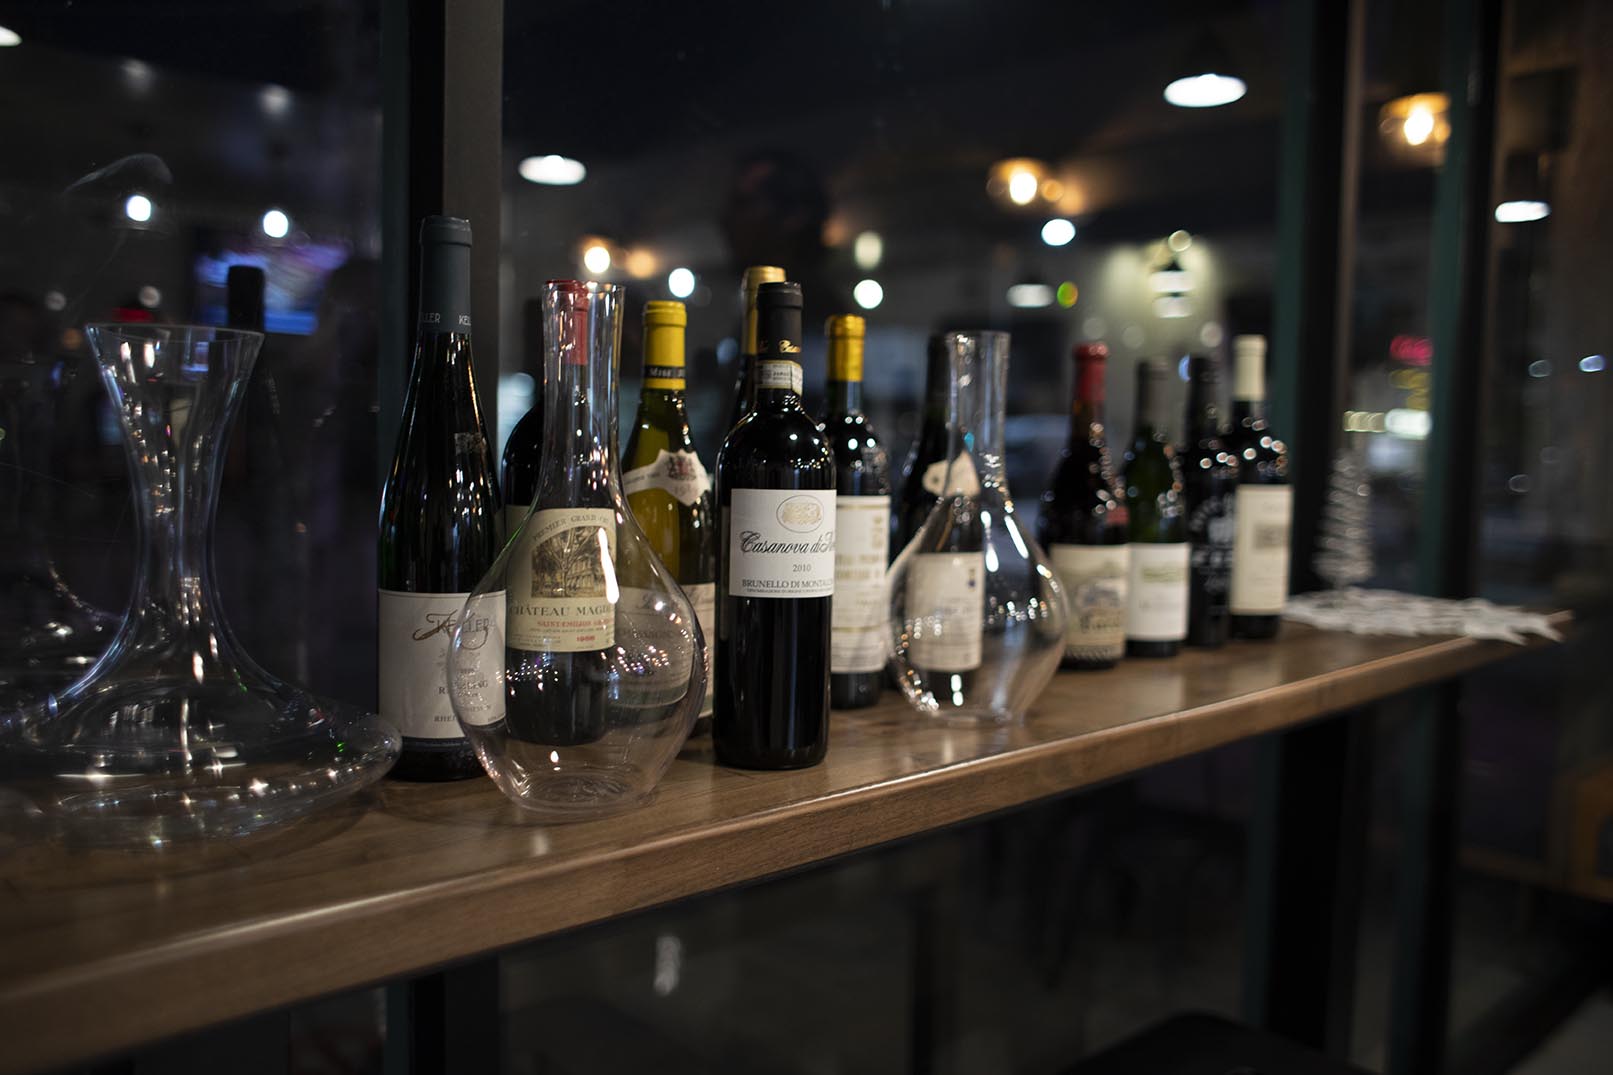 In the Hummus Labs restaurant on a wooden bar, a variety of vintage wines and glass carafes are placed. 